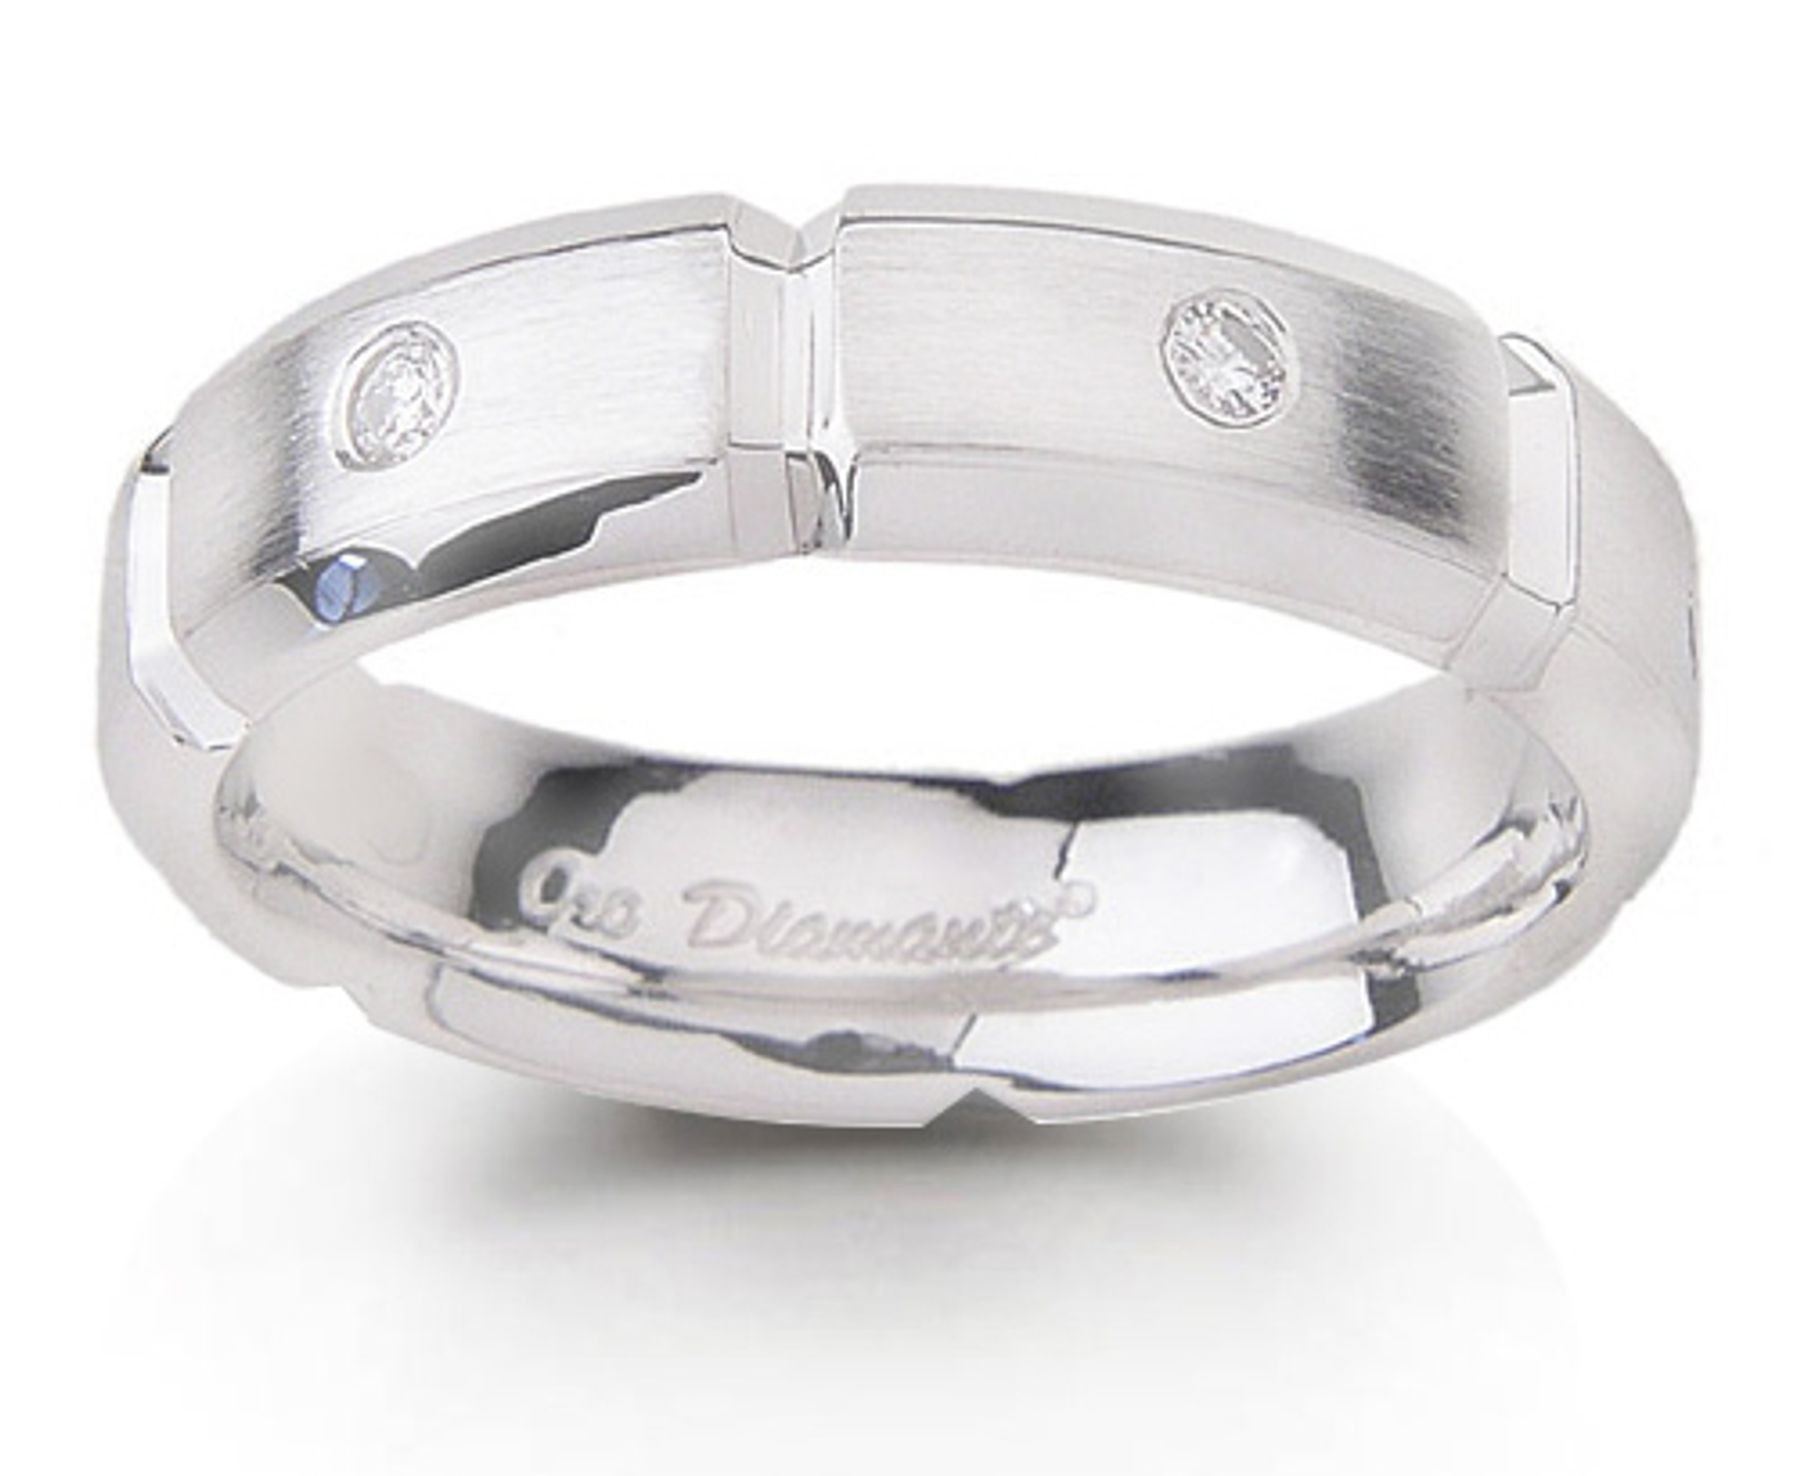 Platinum Diamond Anniversary Mens Ring in Ring Size 9 to 12